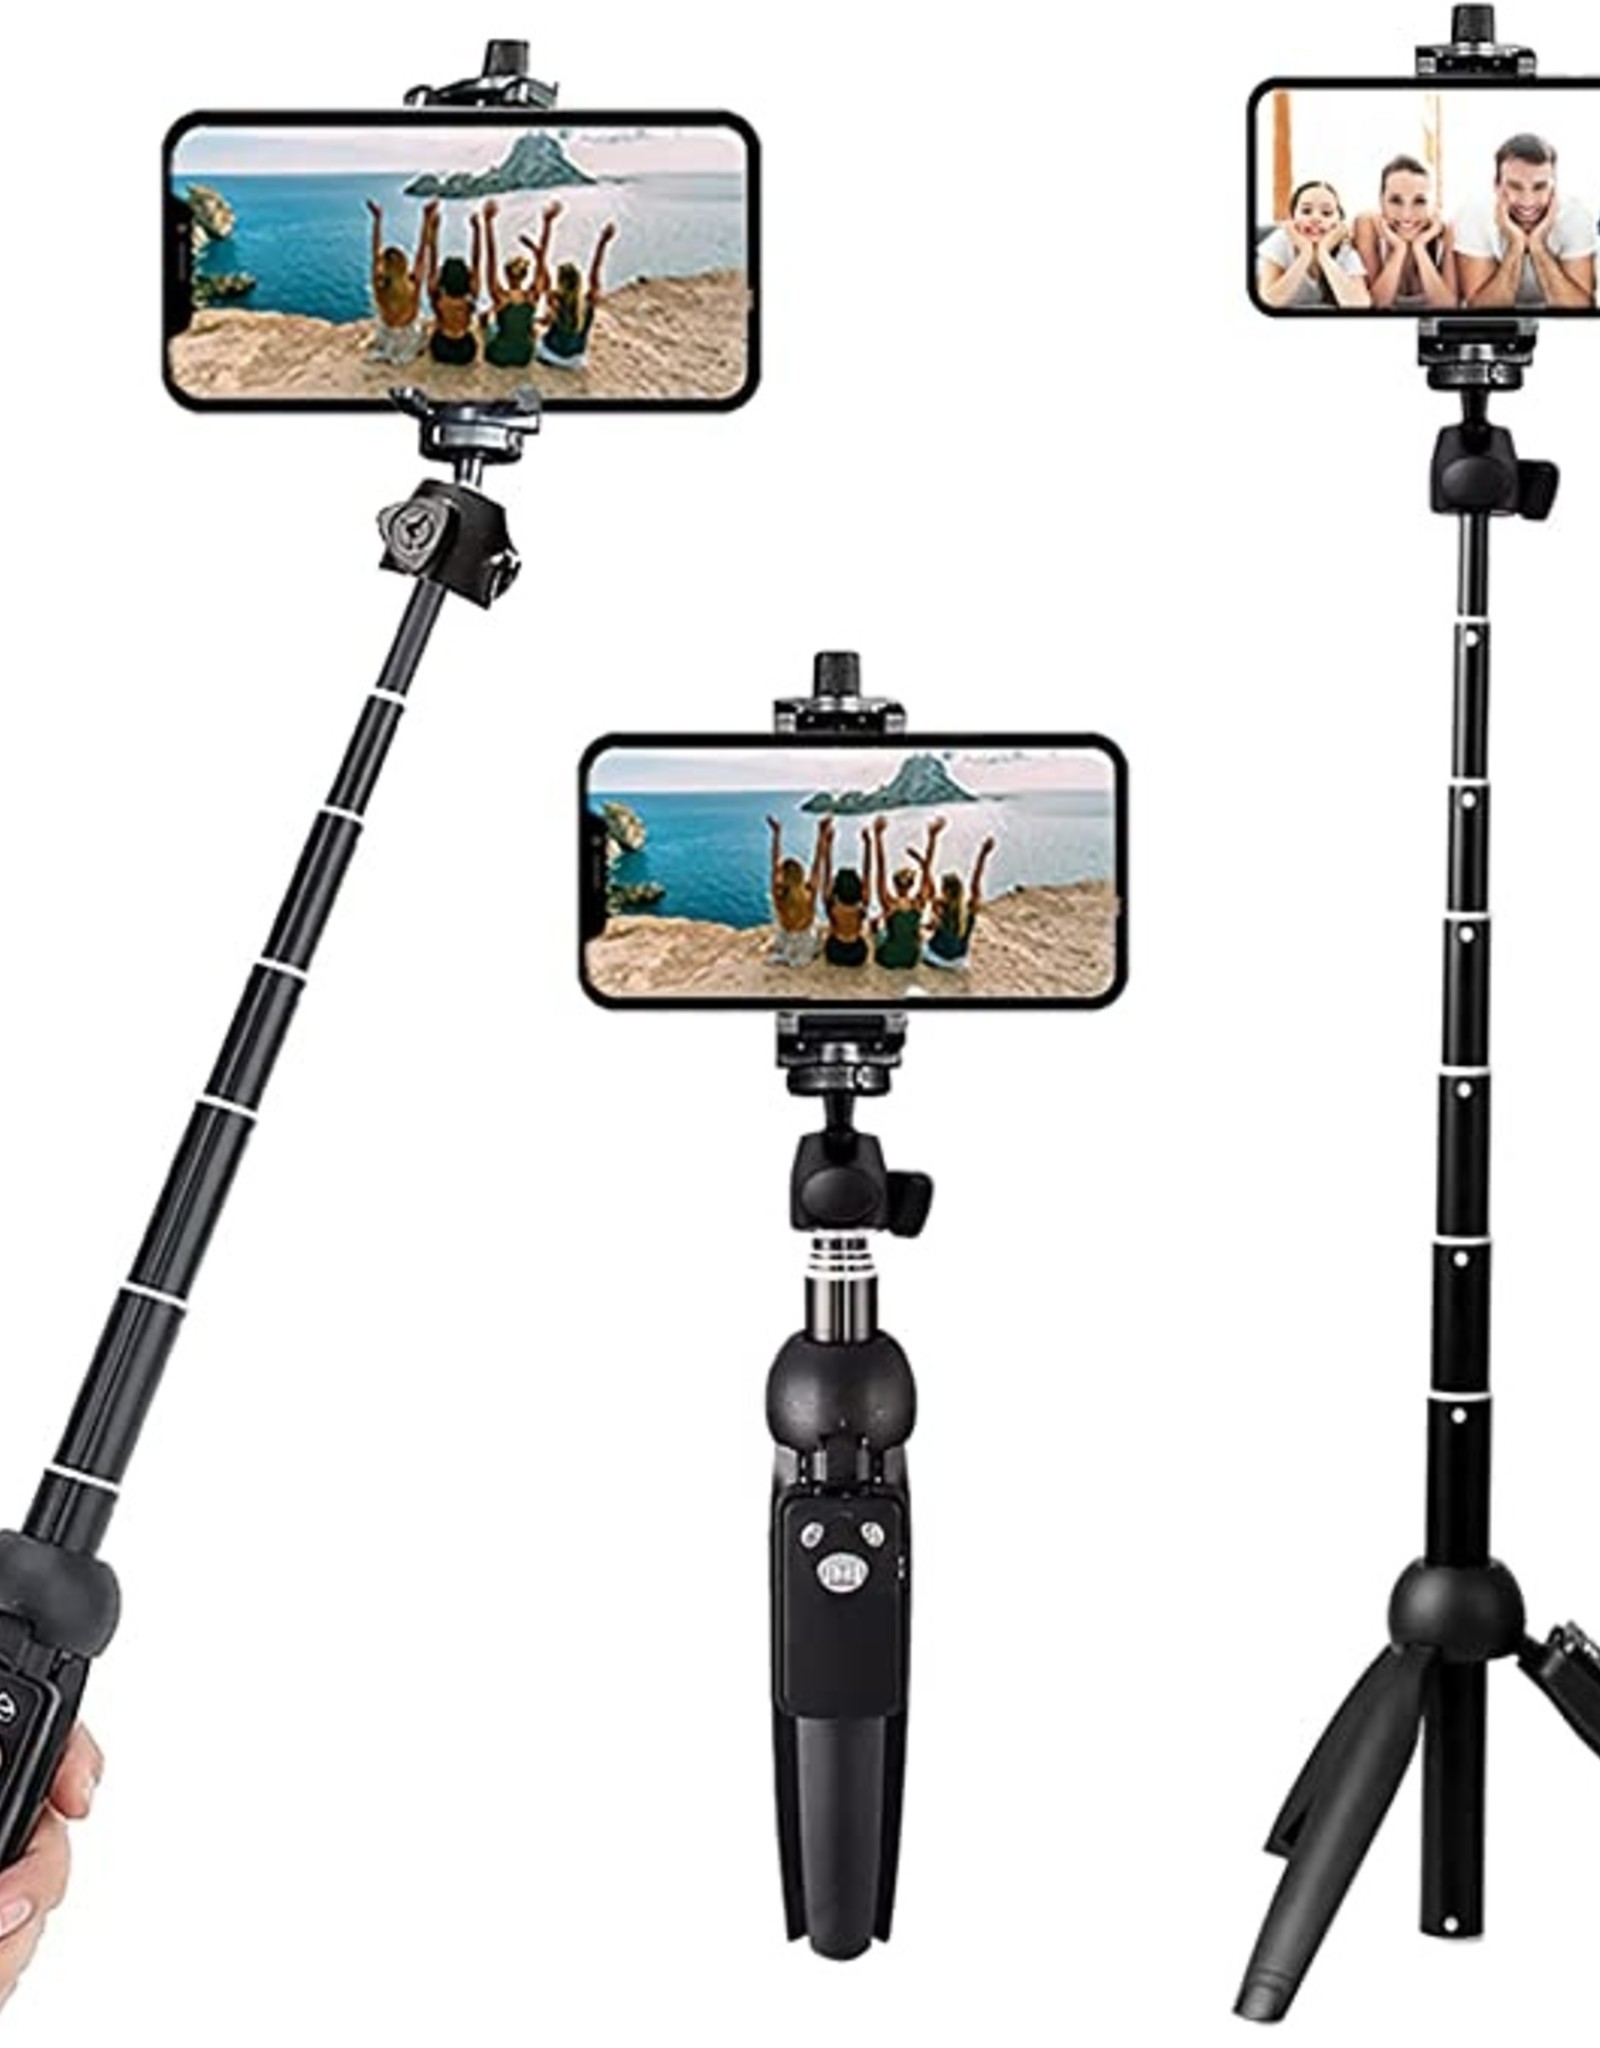 YUNTENG VCT-992 113cm Extendable Selfie Stick Tripod Stand Phone Clip Holder with Wireless Bluetooth Remote Control - Black